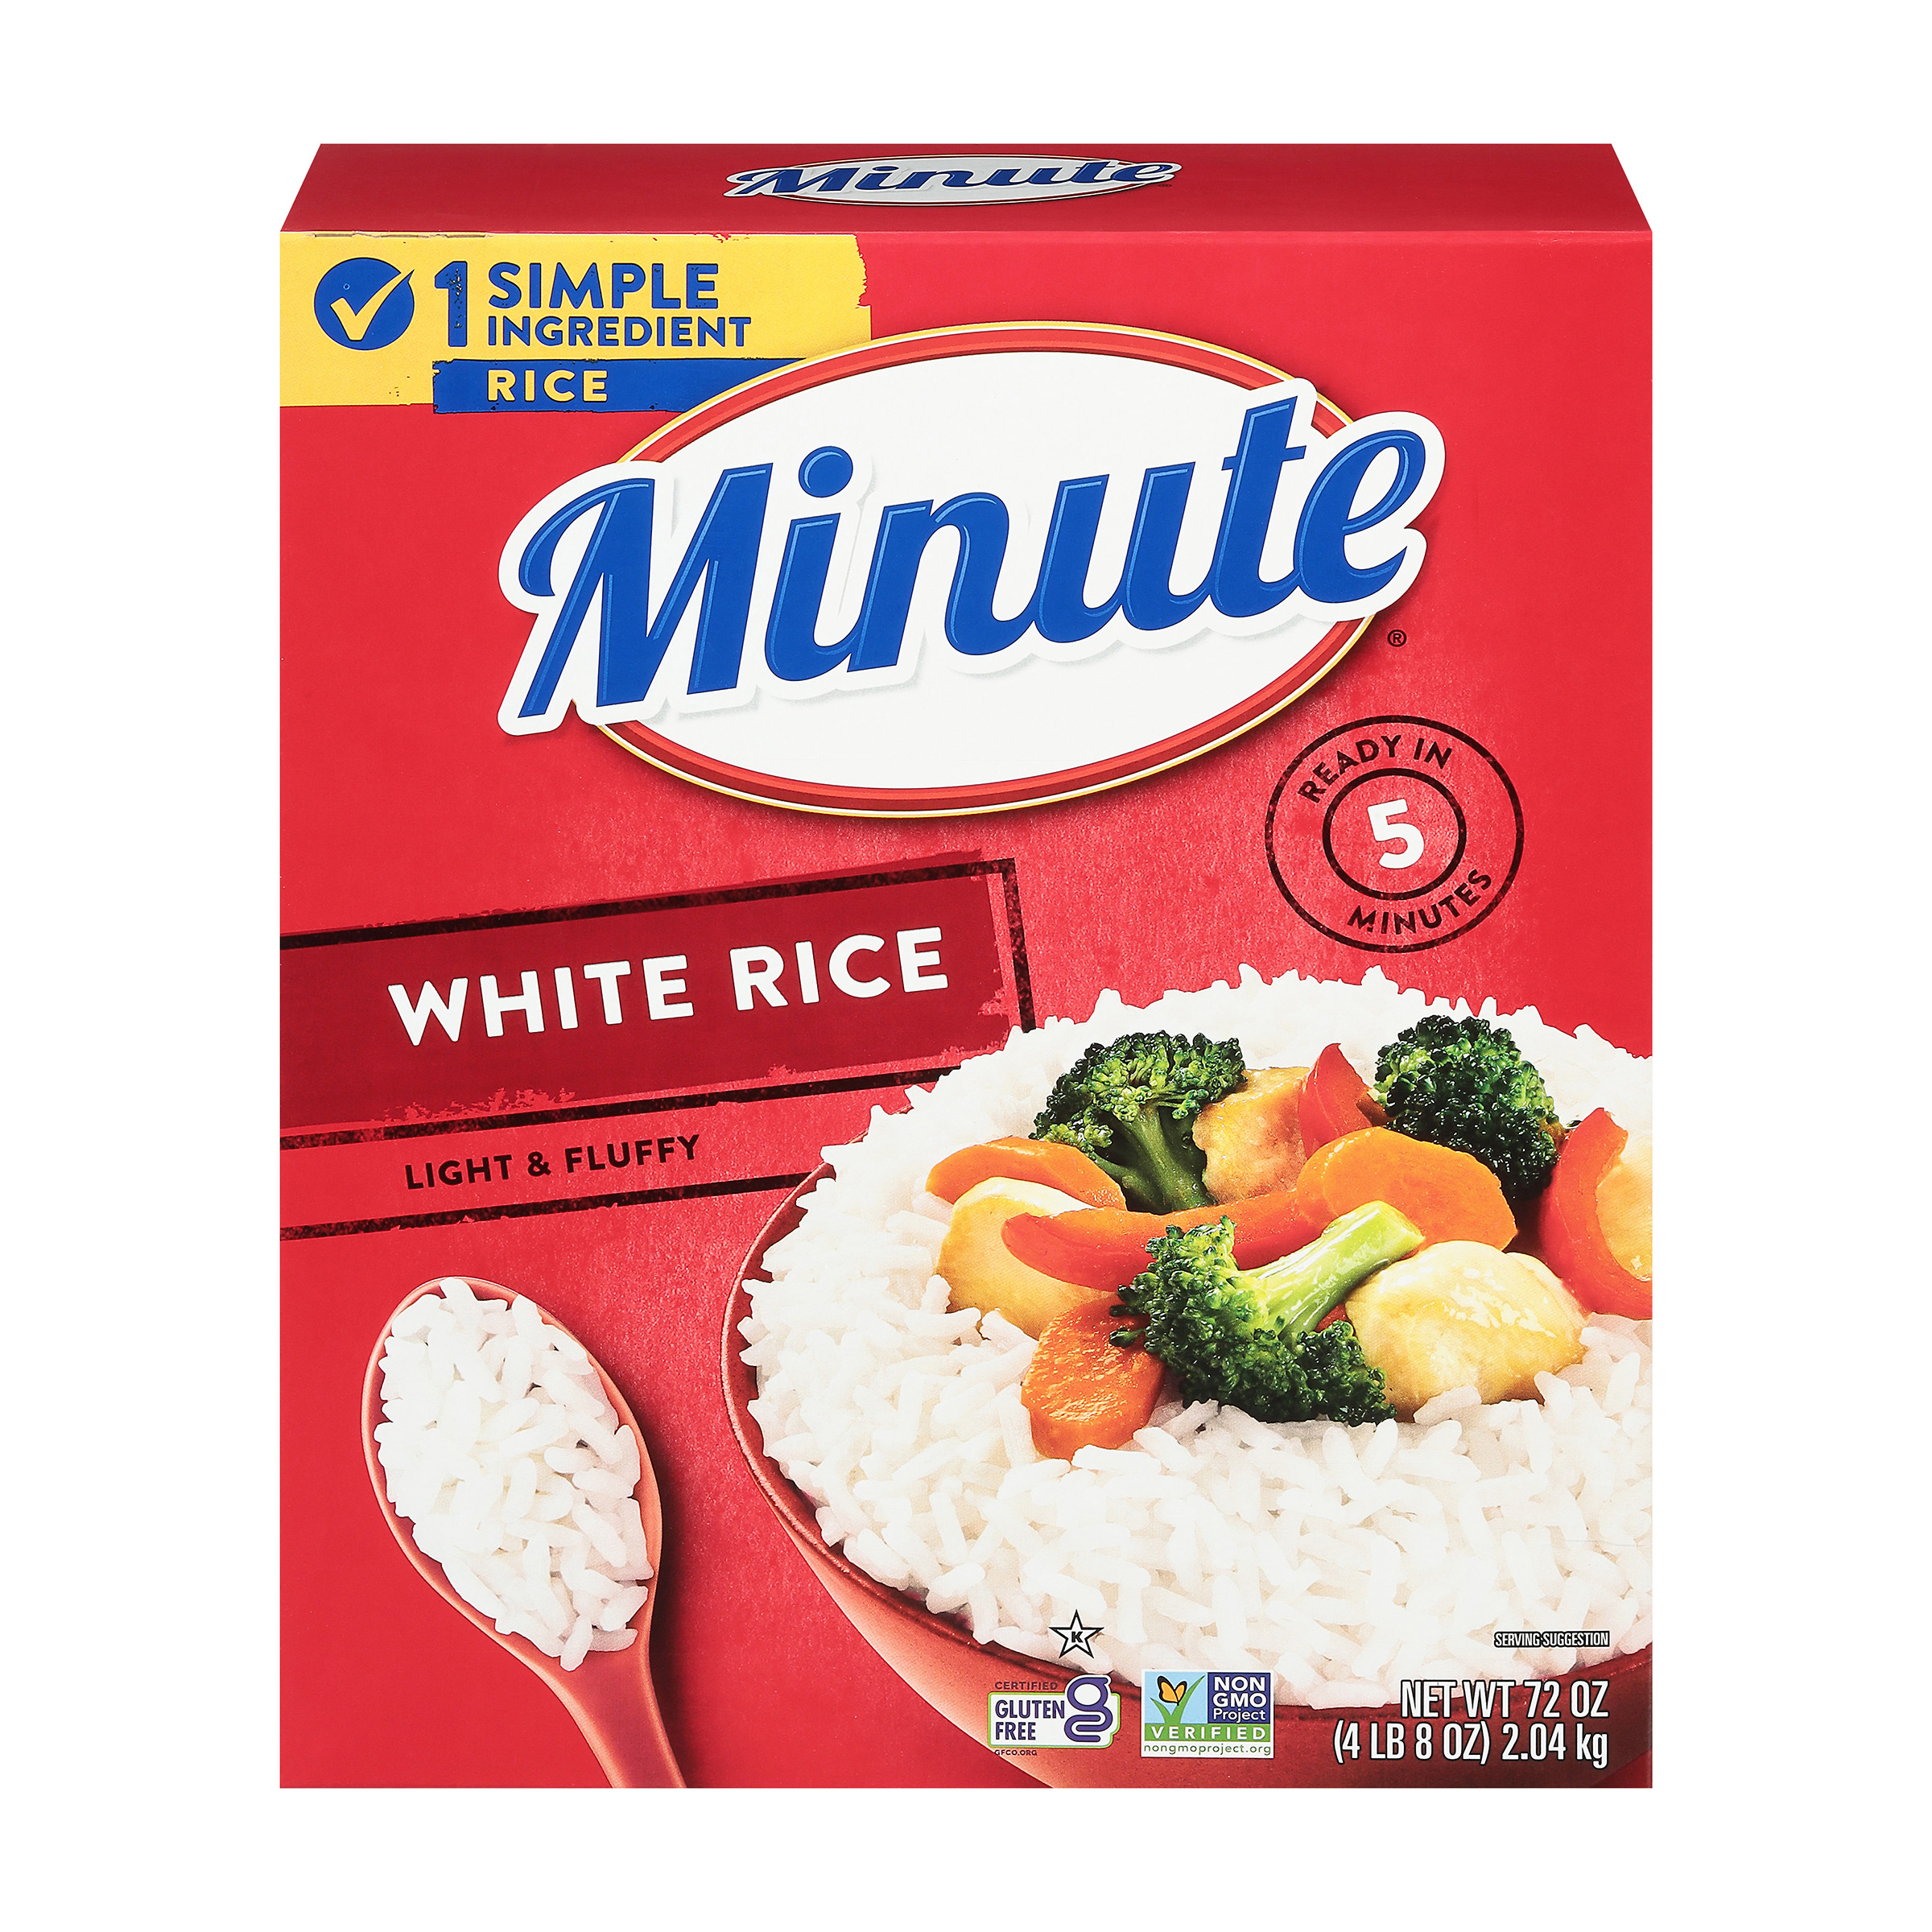 (4 pack) Minute Instant White Rice, Light and Fluffy, 72 oz - image 3 of 9